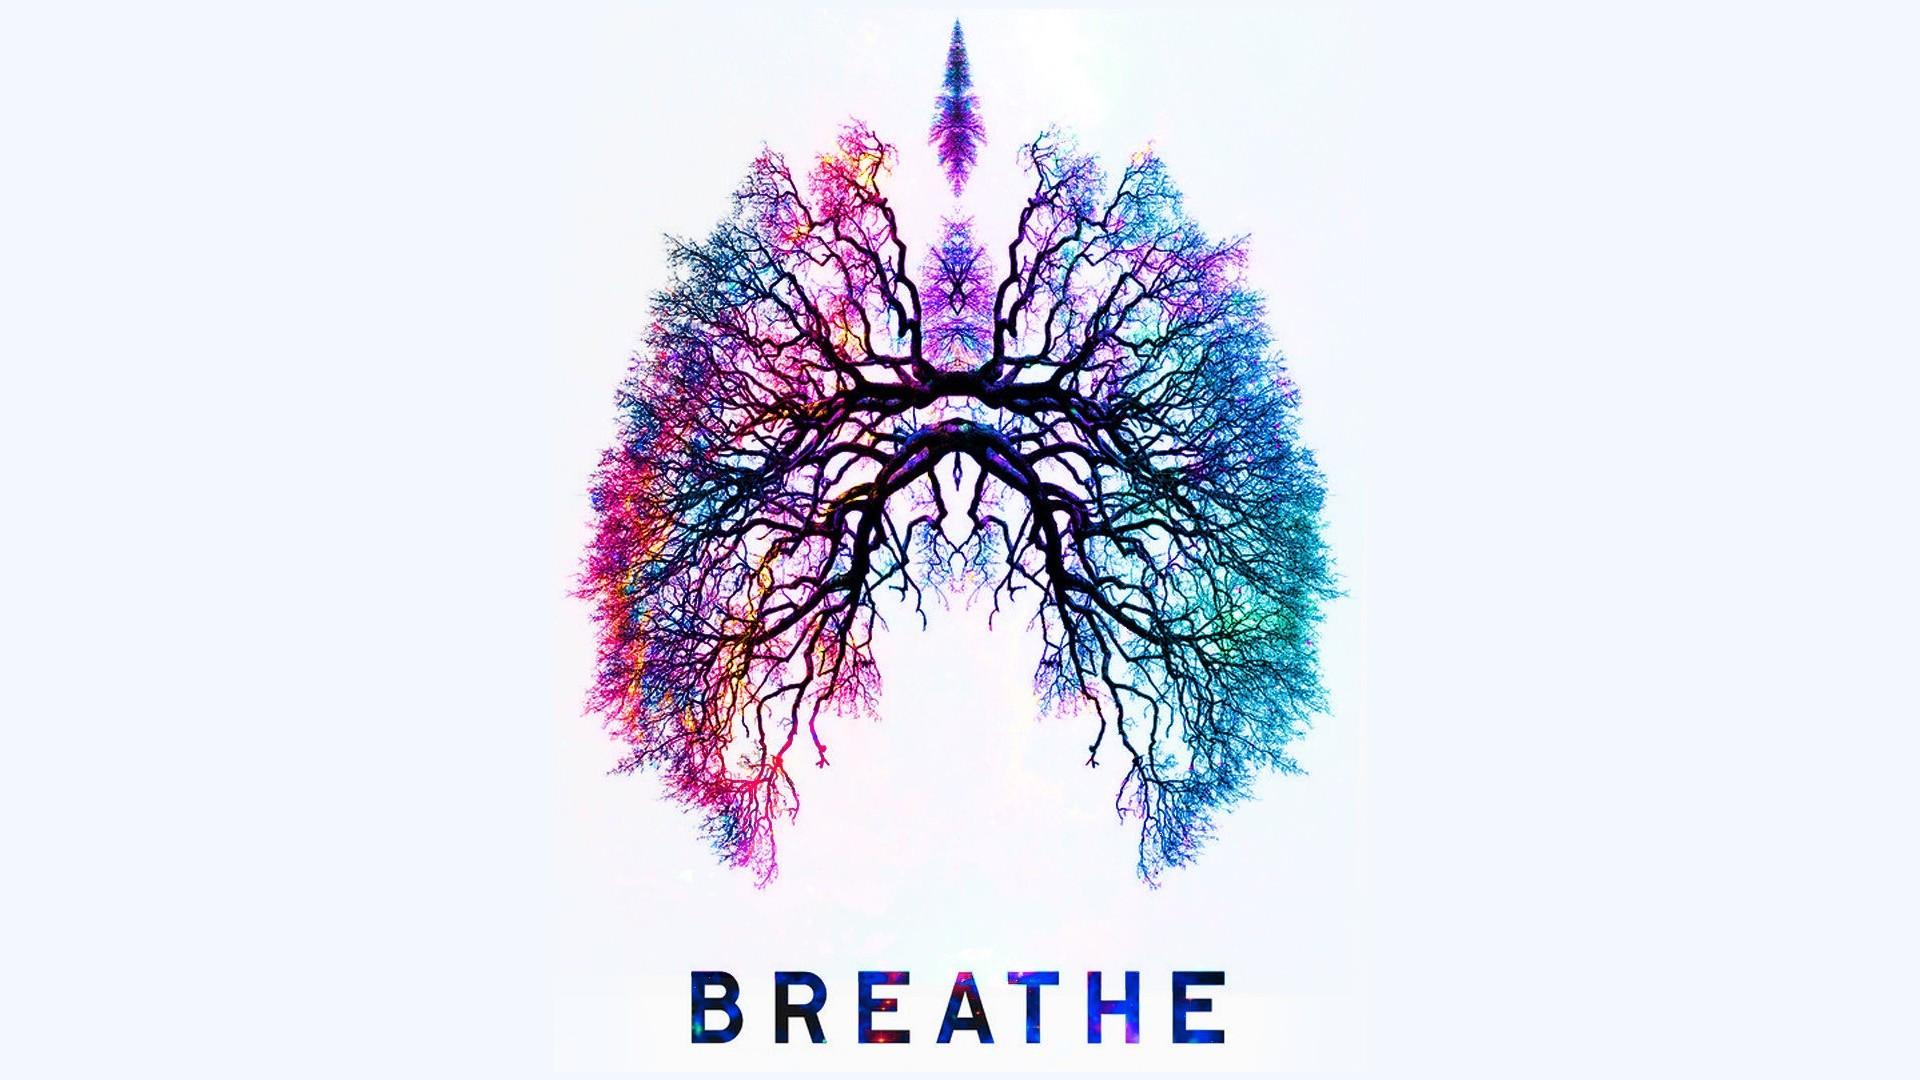 Lungs Wallpaper Free Lungs Background